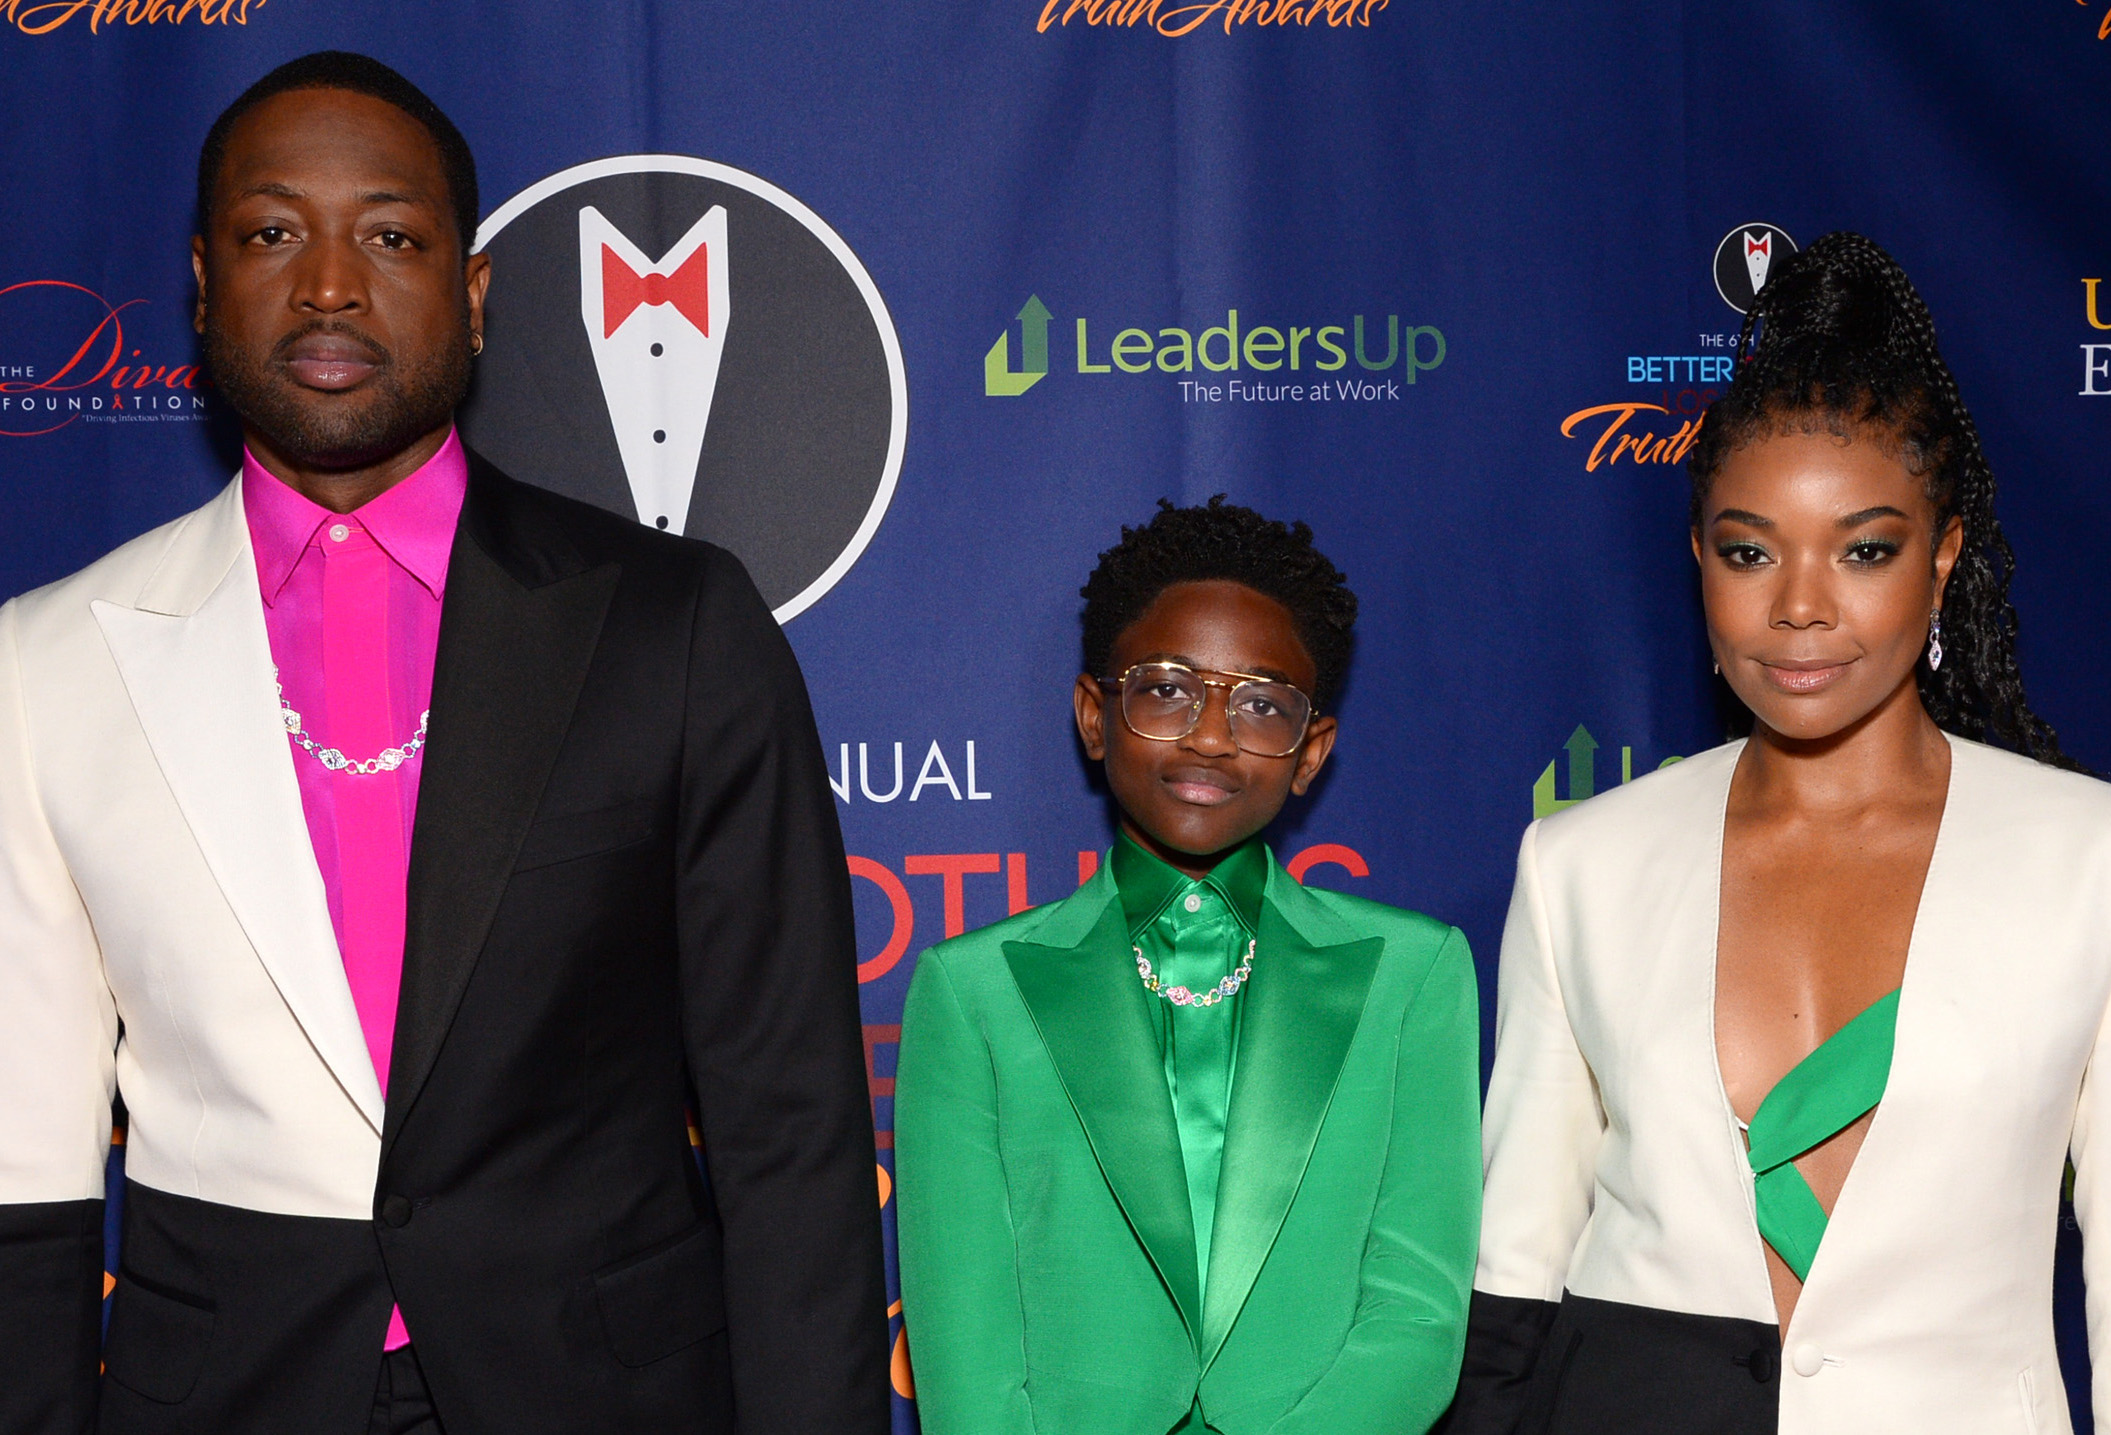 Dwyane Wade Said He Left Florida Because Family Wouldn’t Be ‘Accepted’ Or ‘Feel Comfortable’